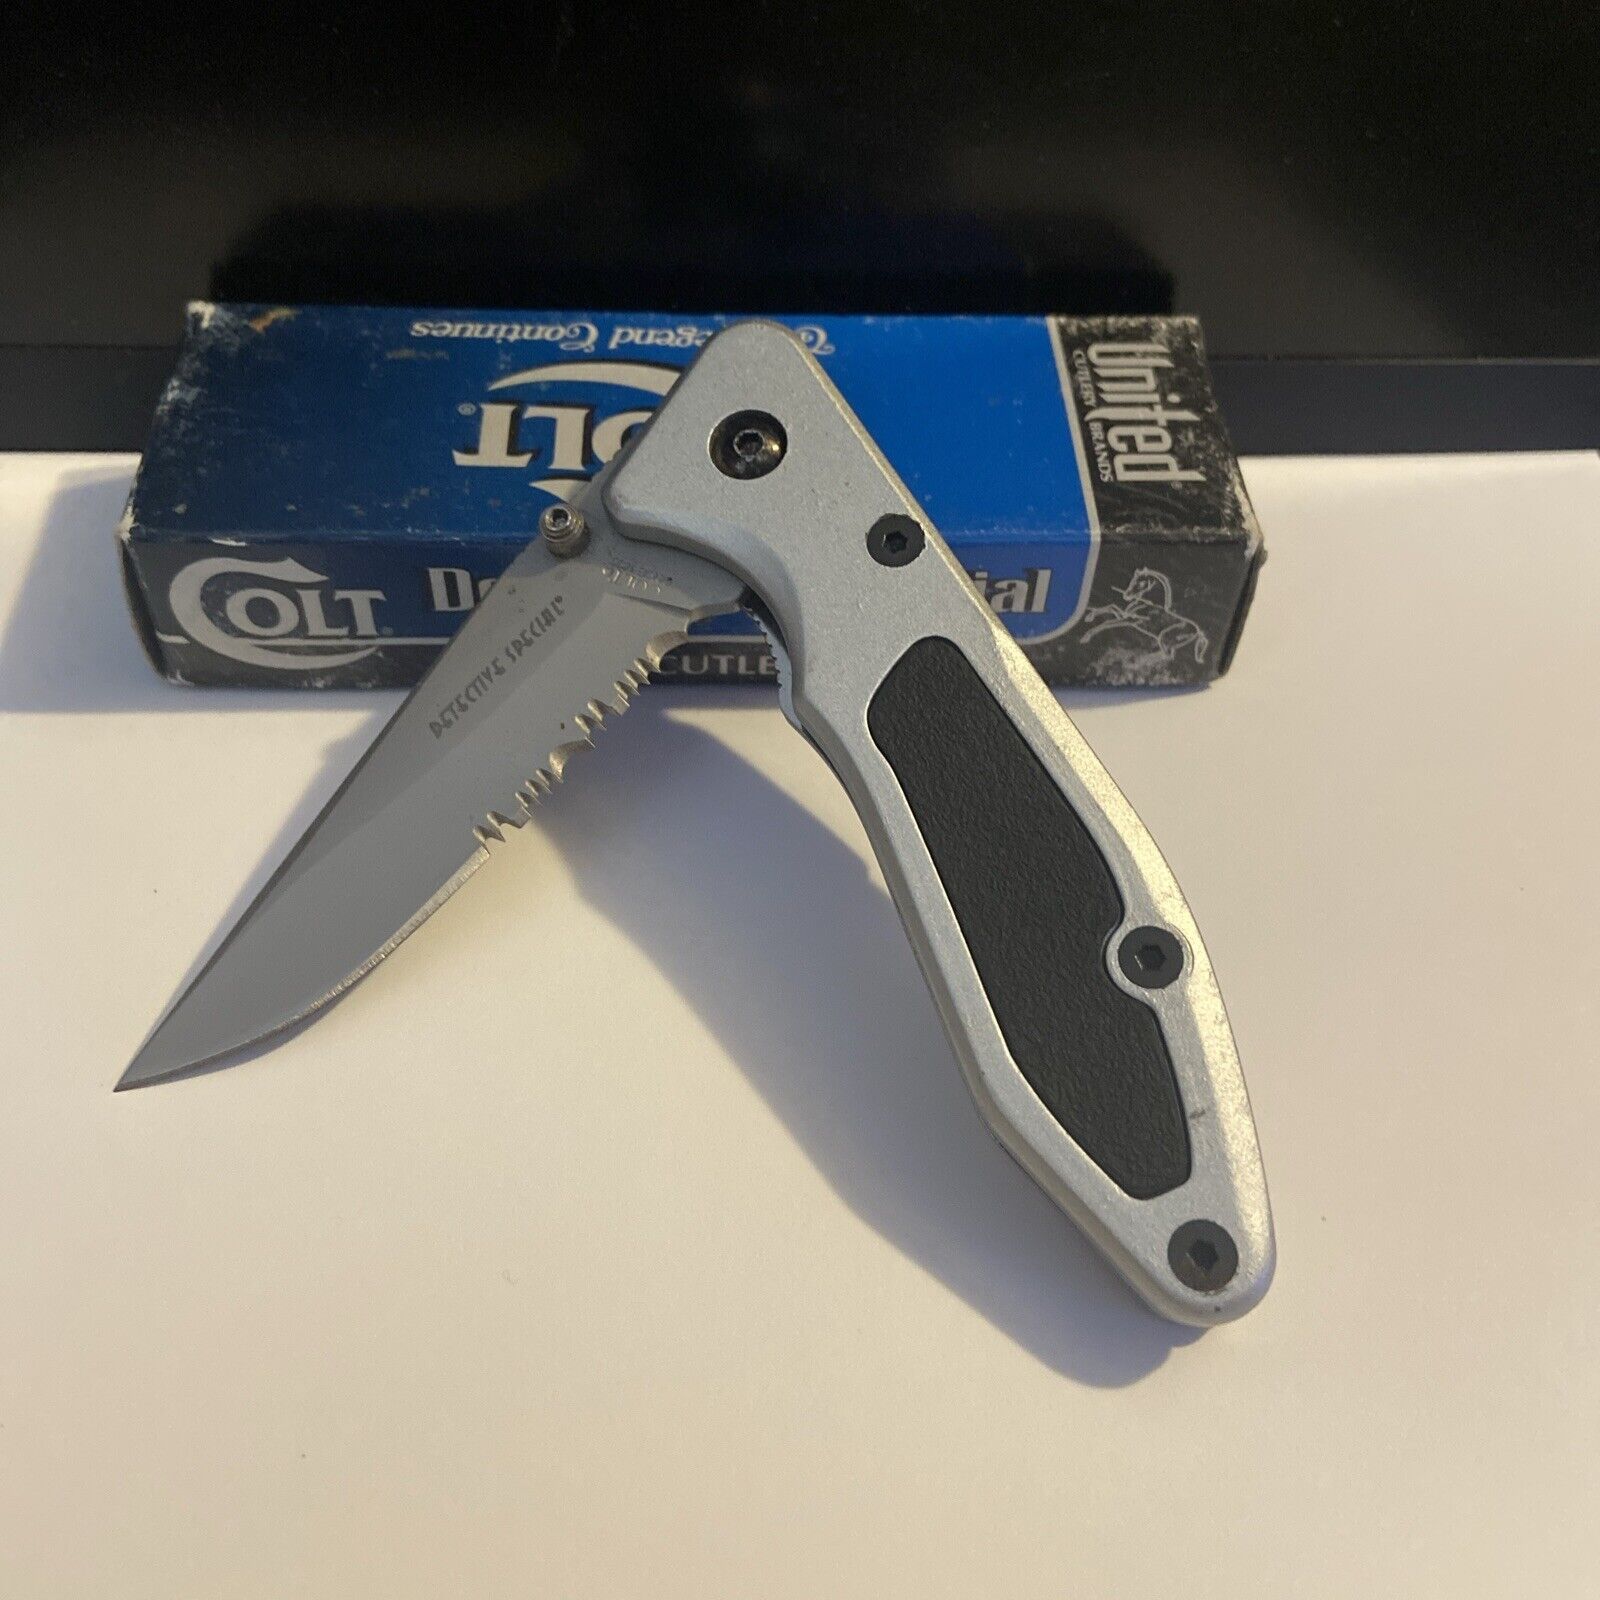 Colt CT32 serrated, new in box, made by United Cutlery for Colt in the early 00